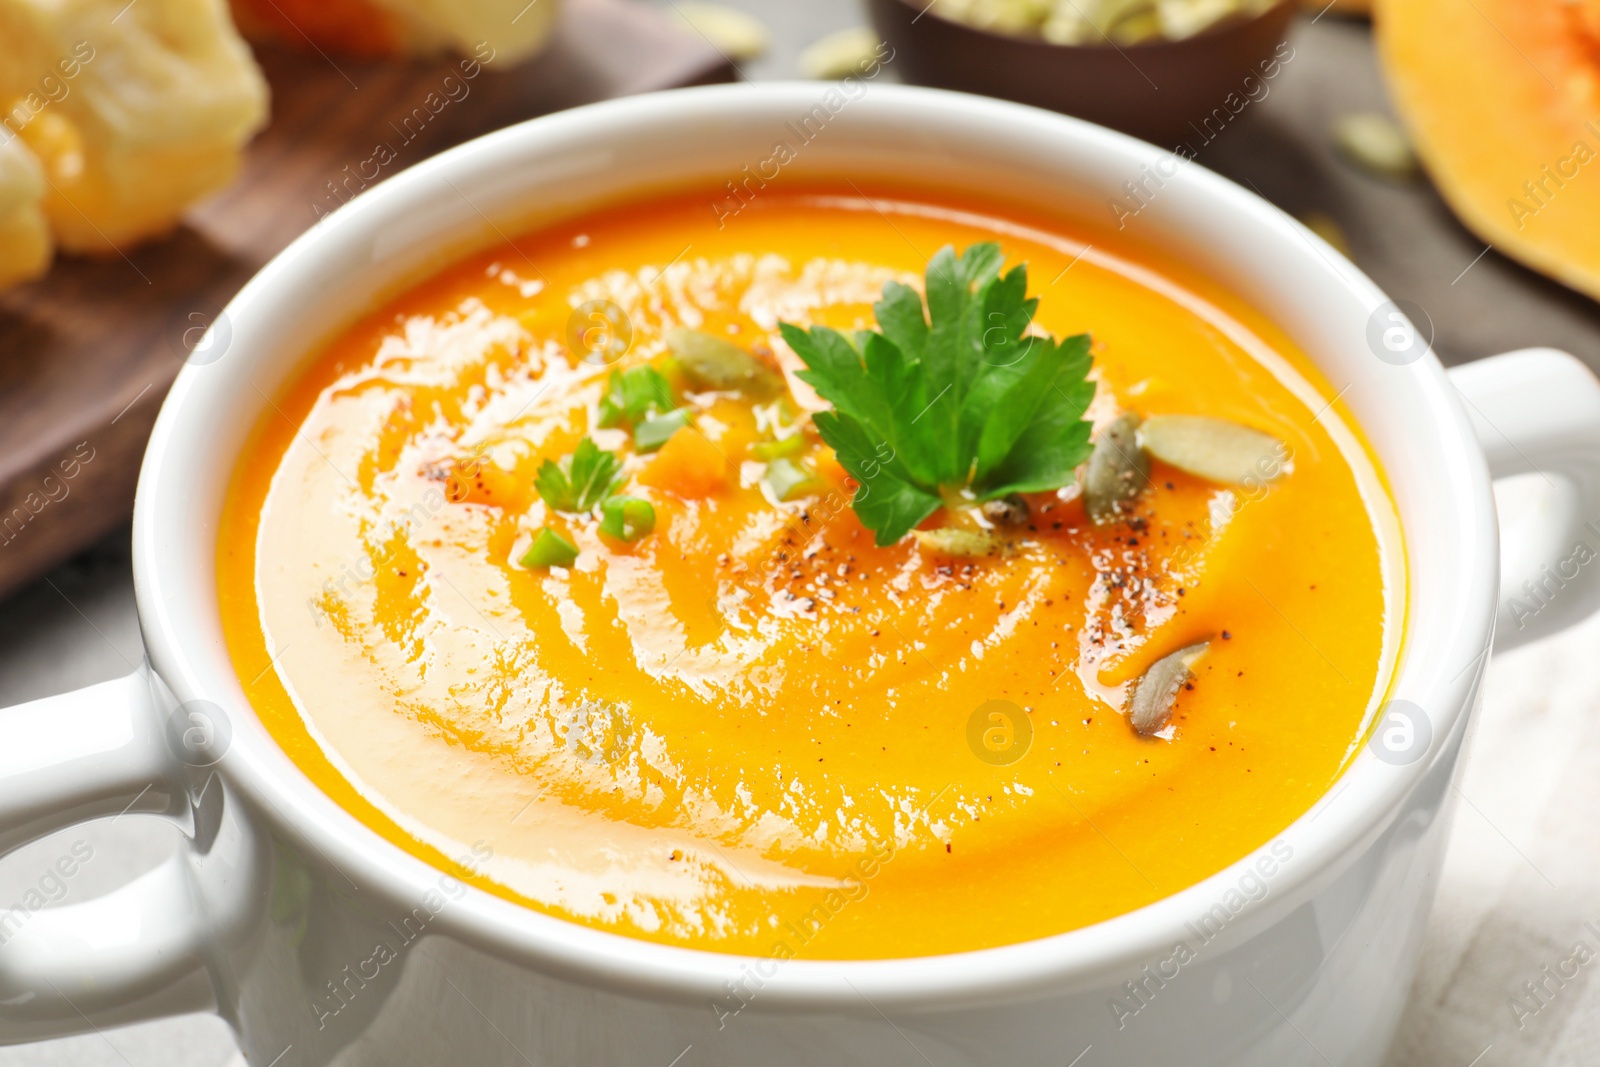 Photo of Bowl with tasty pumpkin soup, closeup view